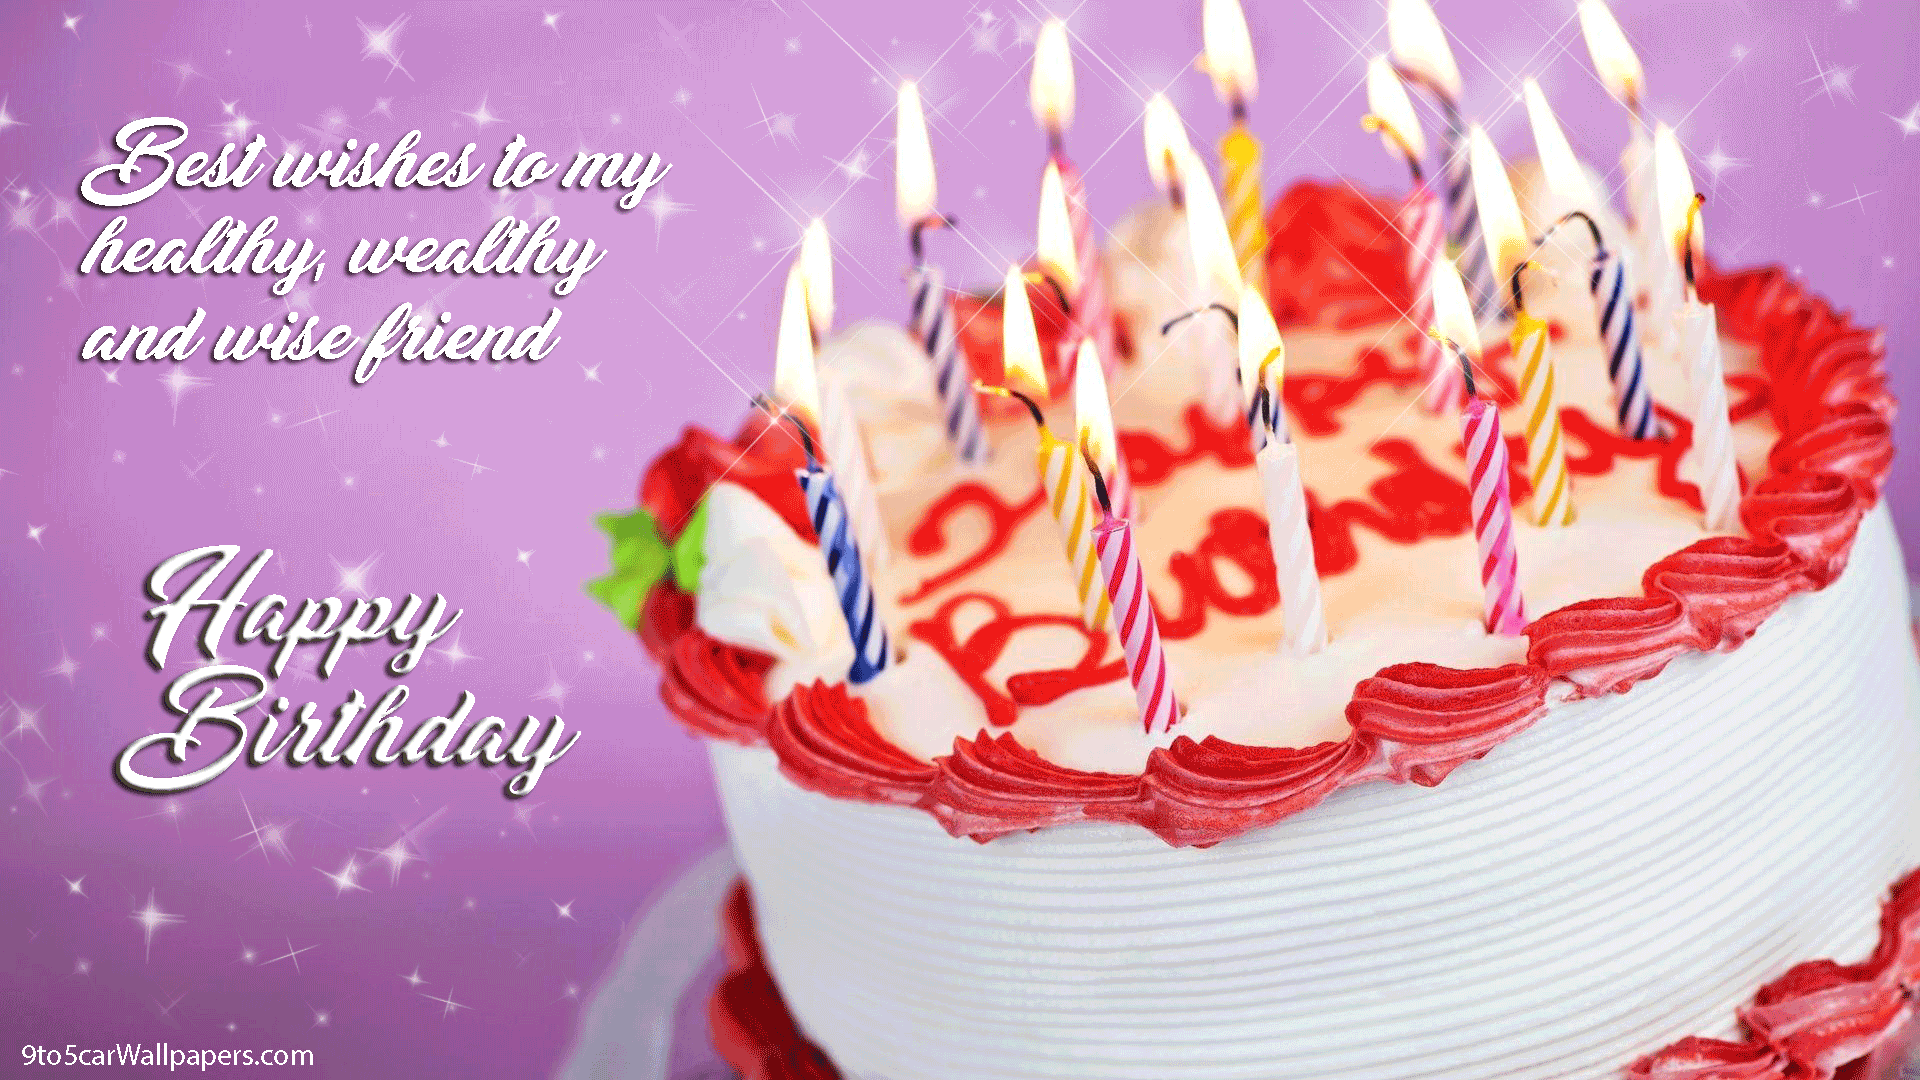 Birthday-cakeHappy-Birthday-Quotes-Images-download-pics-animations-cards-wishes